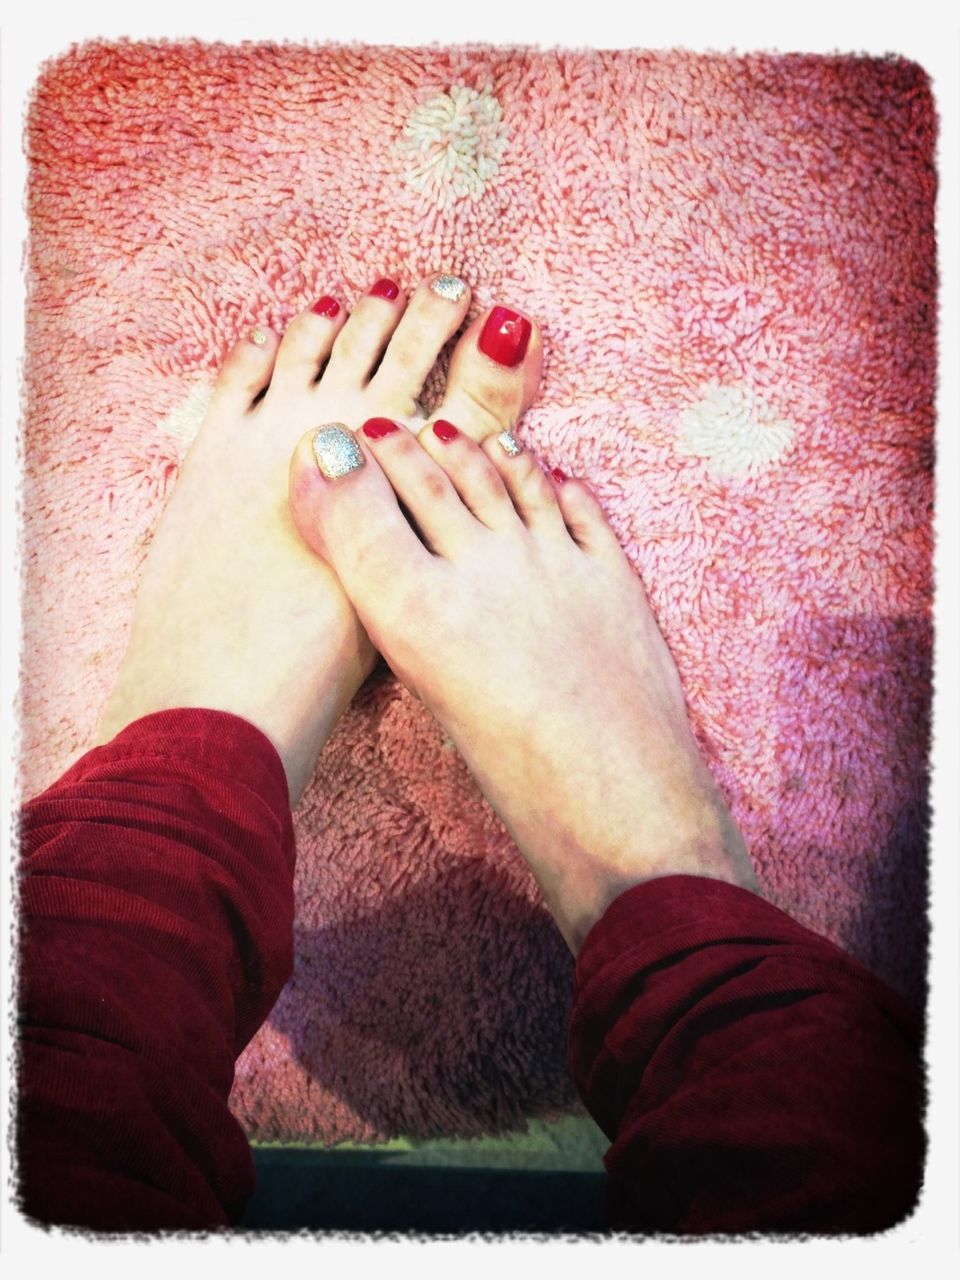 person, low section, lifestyles, transfer print, personal perspective, leisure activity, auto post production filter, human foot, barefoot, red, high angle view, indoors, relaxation, part of, nail polish